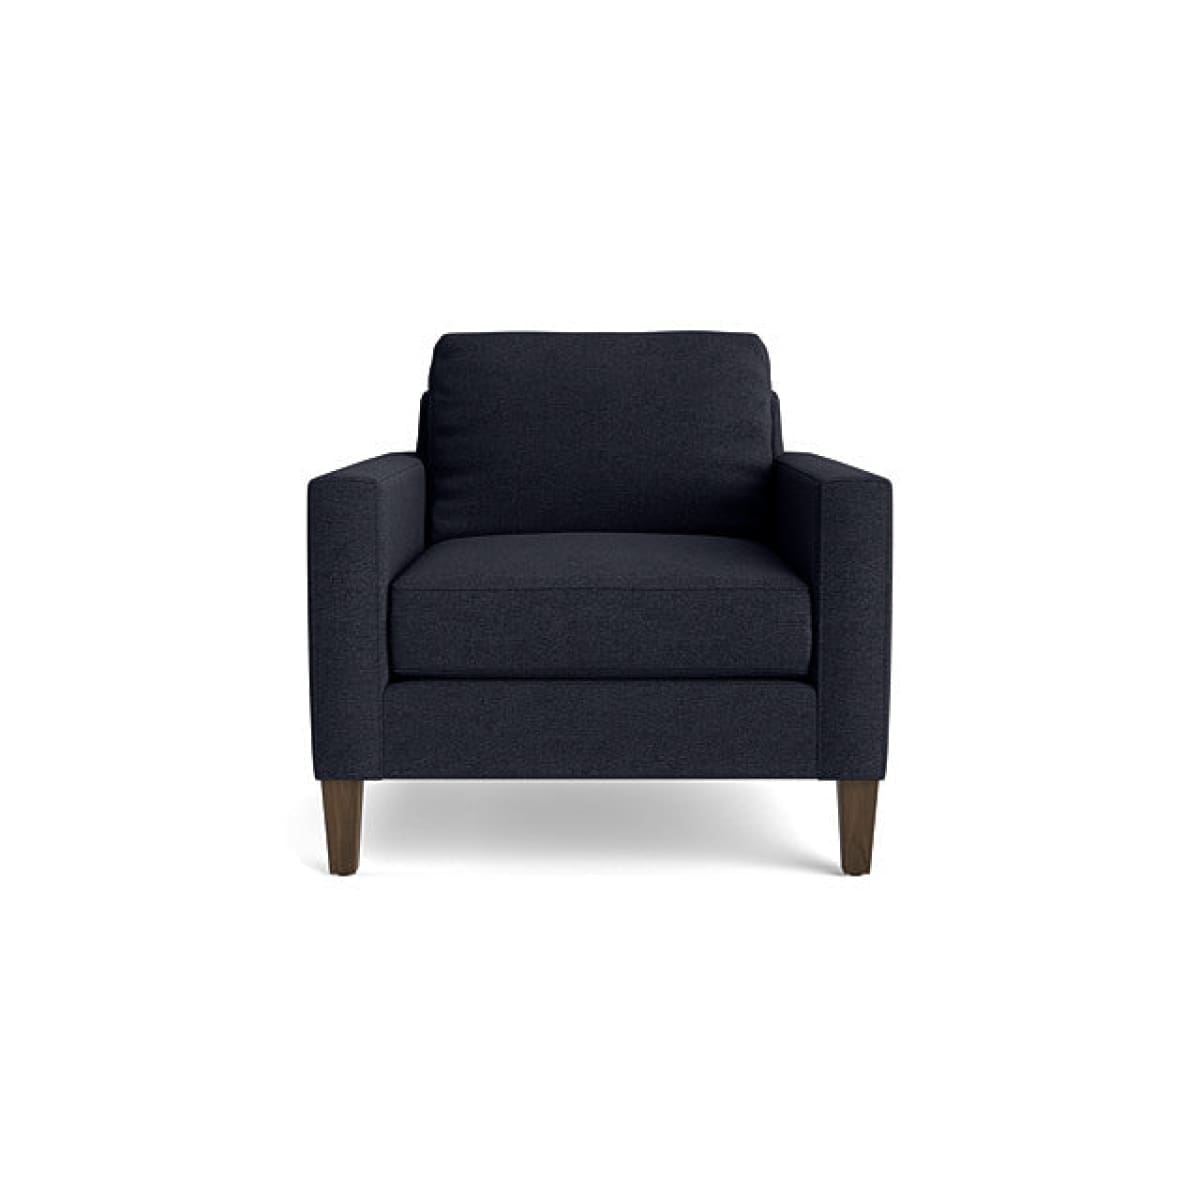 Kent Accent Chair - Entice Navy